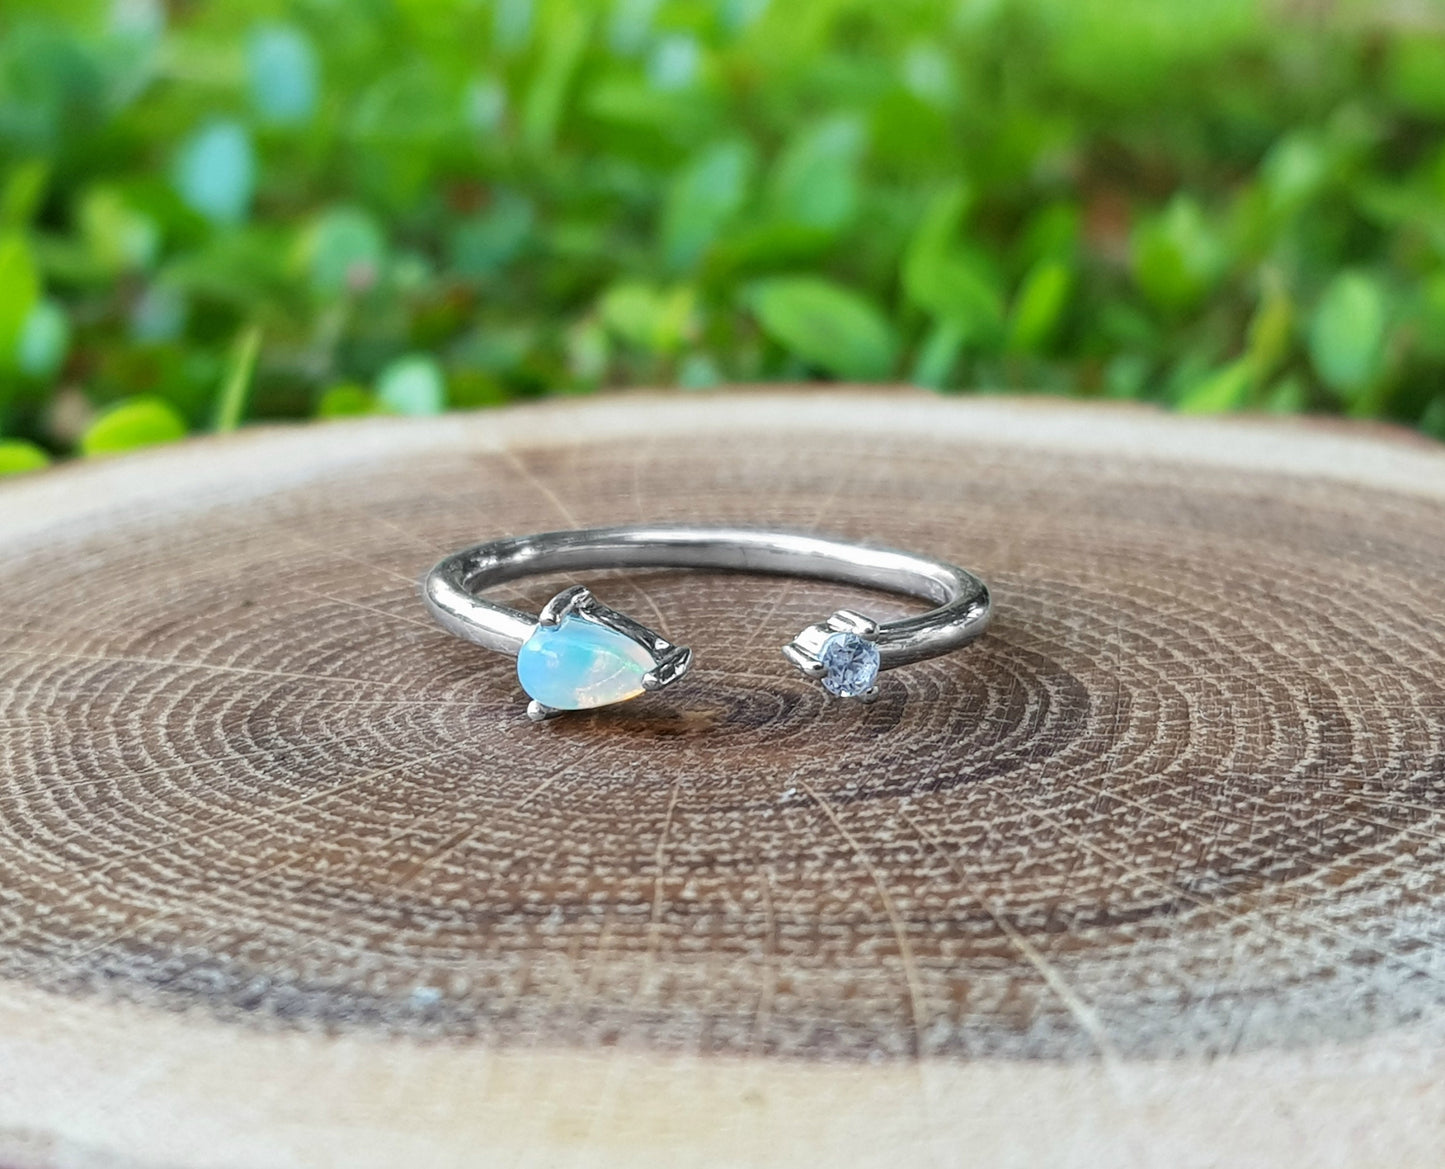 Ethiopian Opal And Zircon Ring Adjustable Gemstone Ring Dainty Ring Sterling Silver Or Gold Plated Minimal Ring Stacking Ring Unique Gift